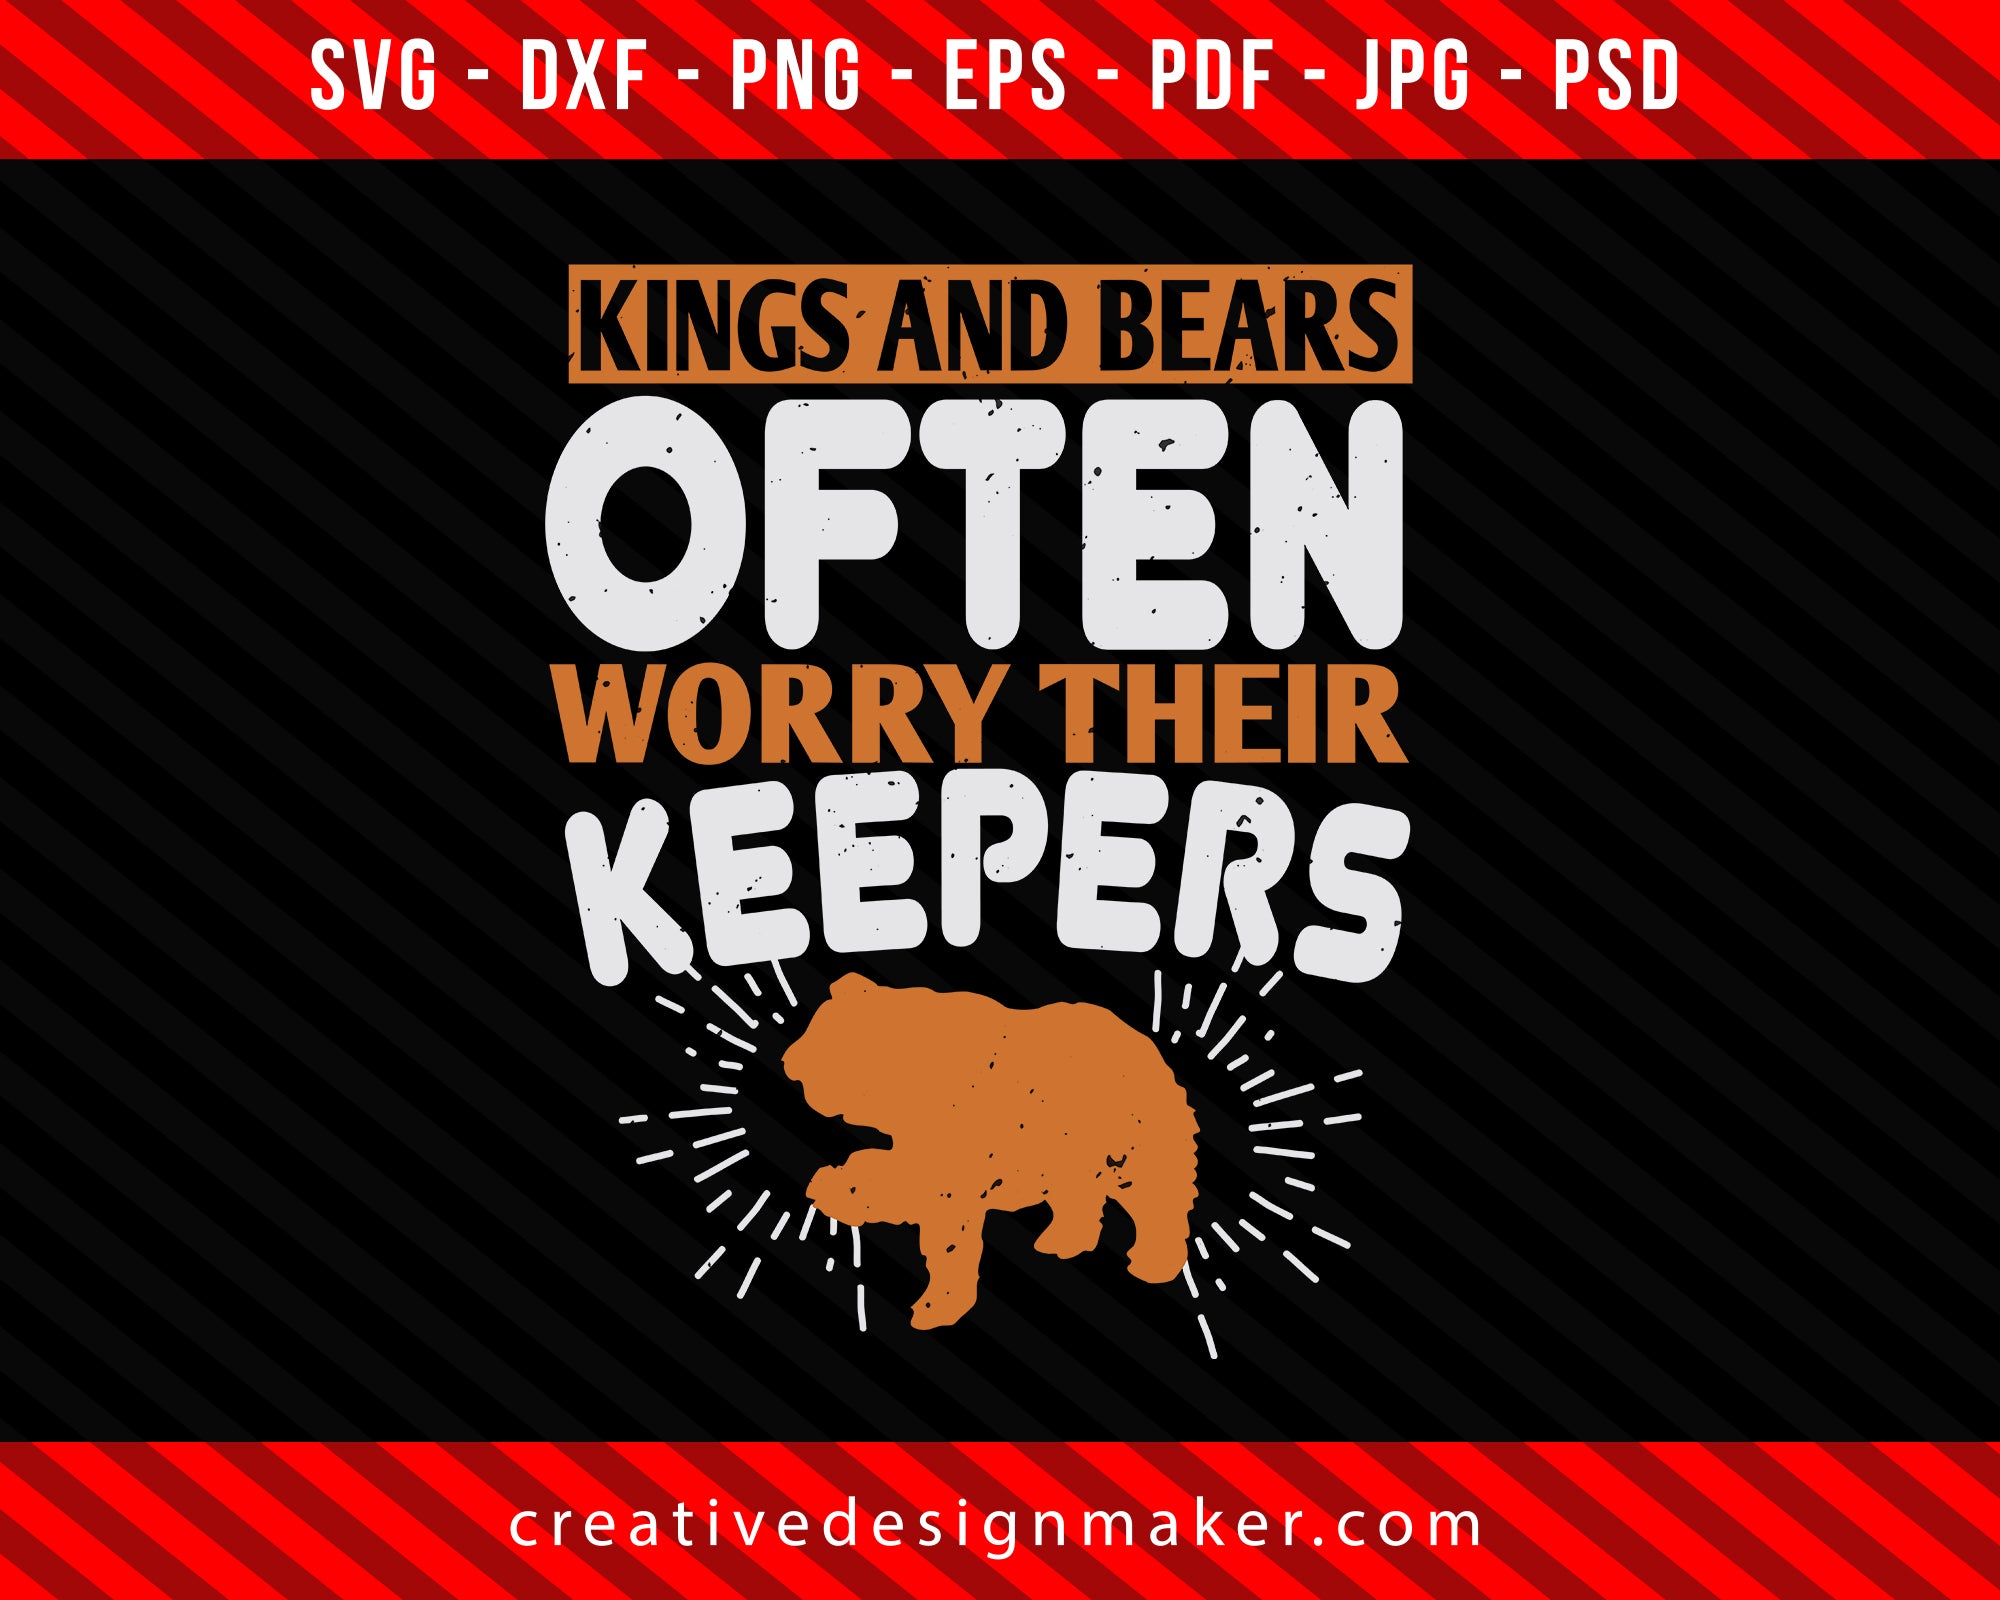 Kings and Bears often worry their Keepers Bear Print Ready Editable T-Shirt SVG Design!